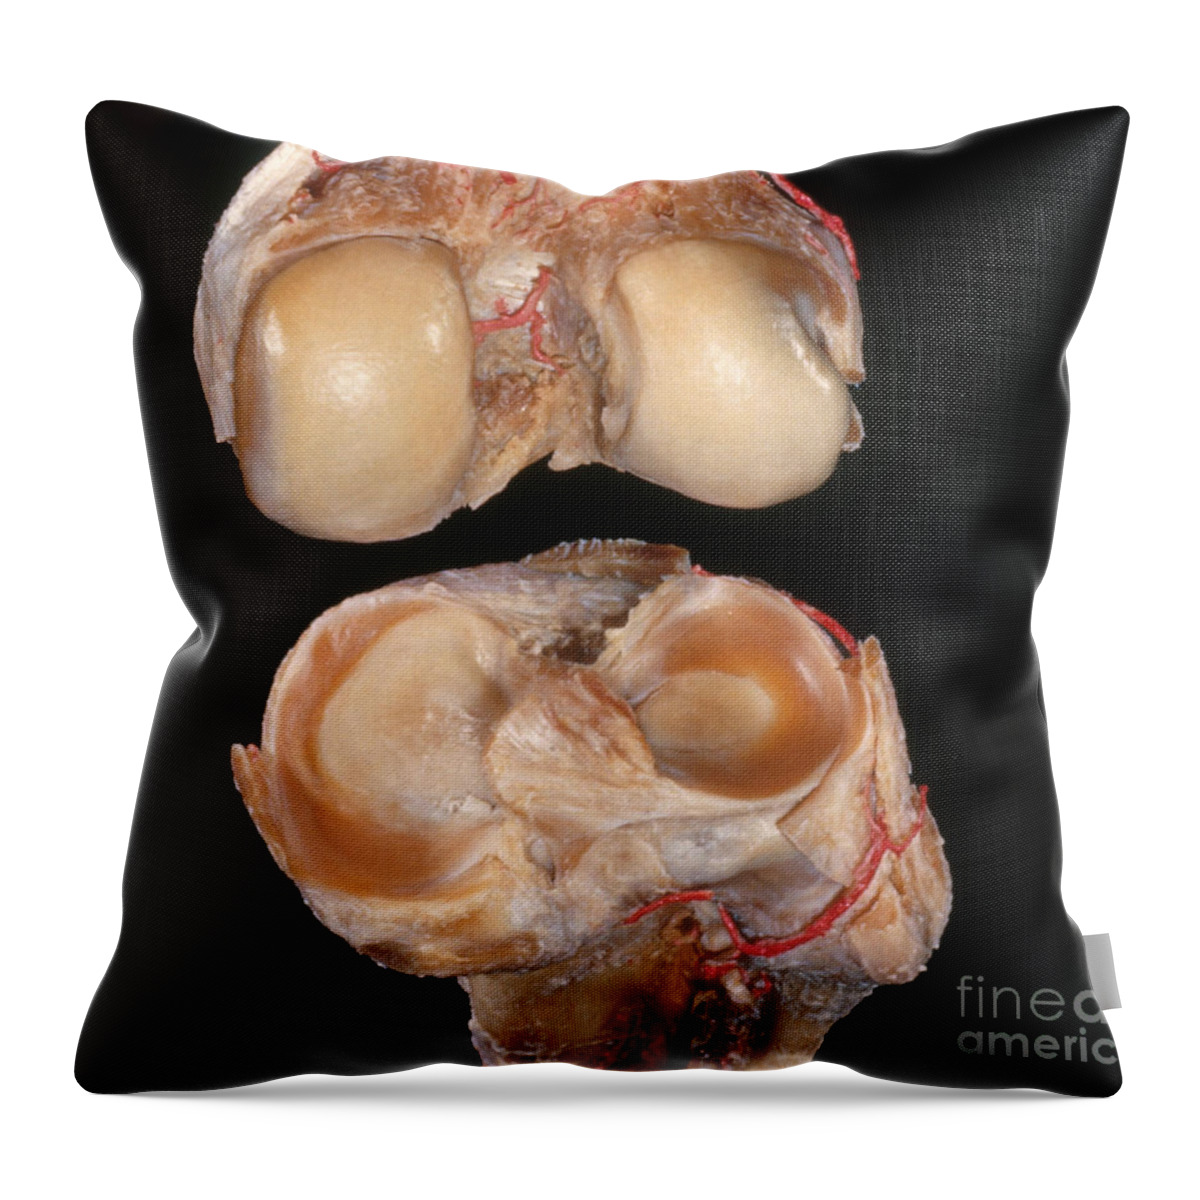 Anatomy Throw Pillow featuring the photograph Disarticulated Knee Joint by VideoSurgery